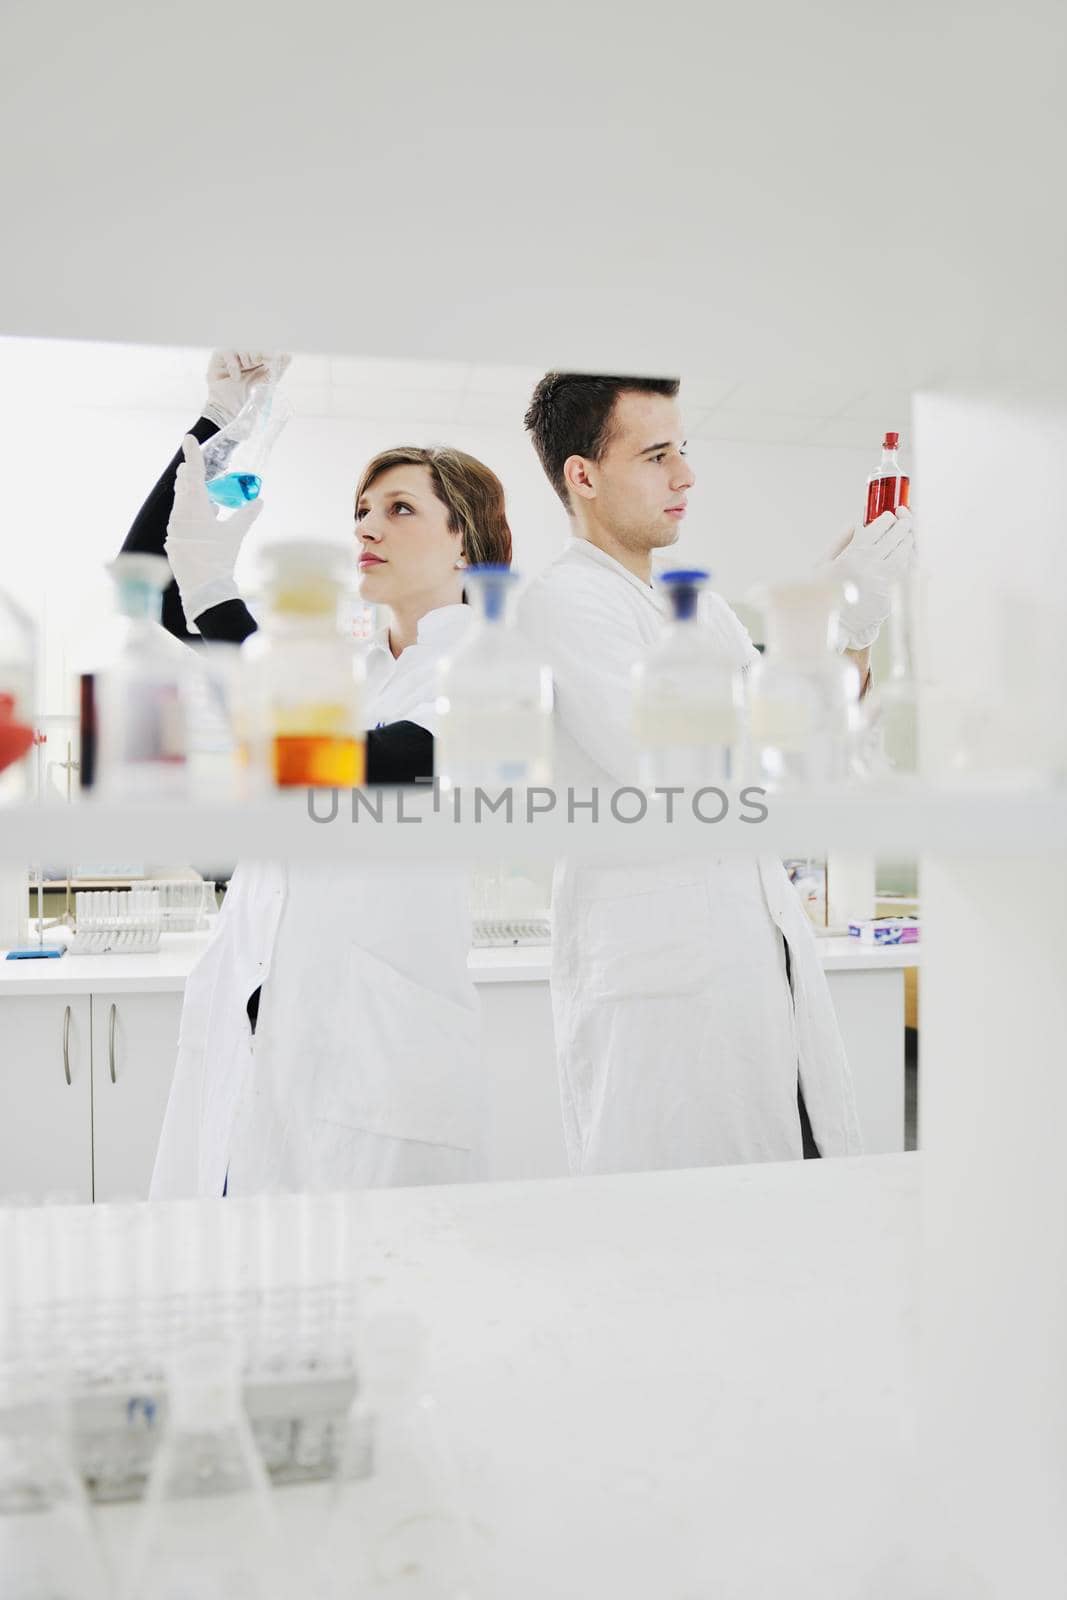 young students in bright lab